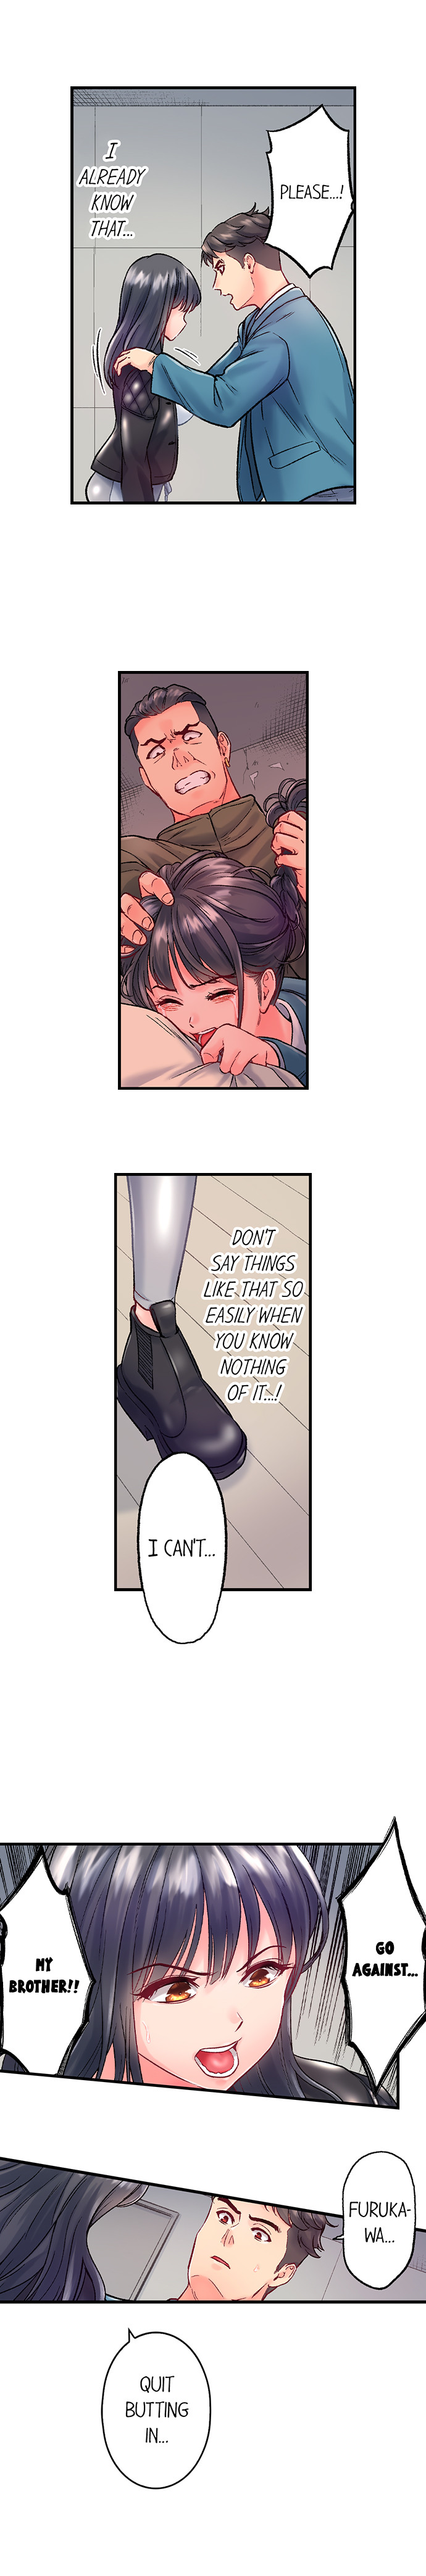 The Porn Star Reincarnated Into a Bullied Boy - Chapter 16 Page 6